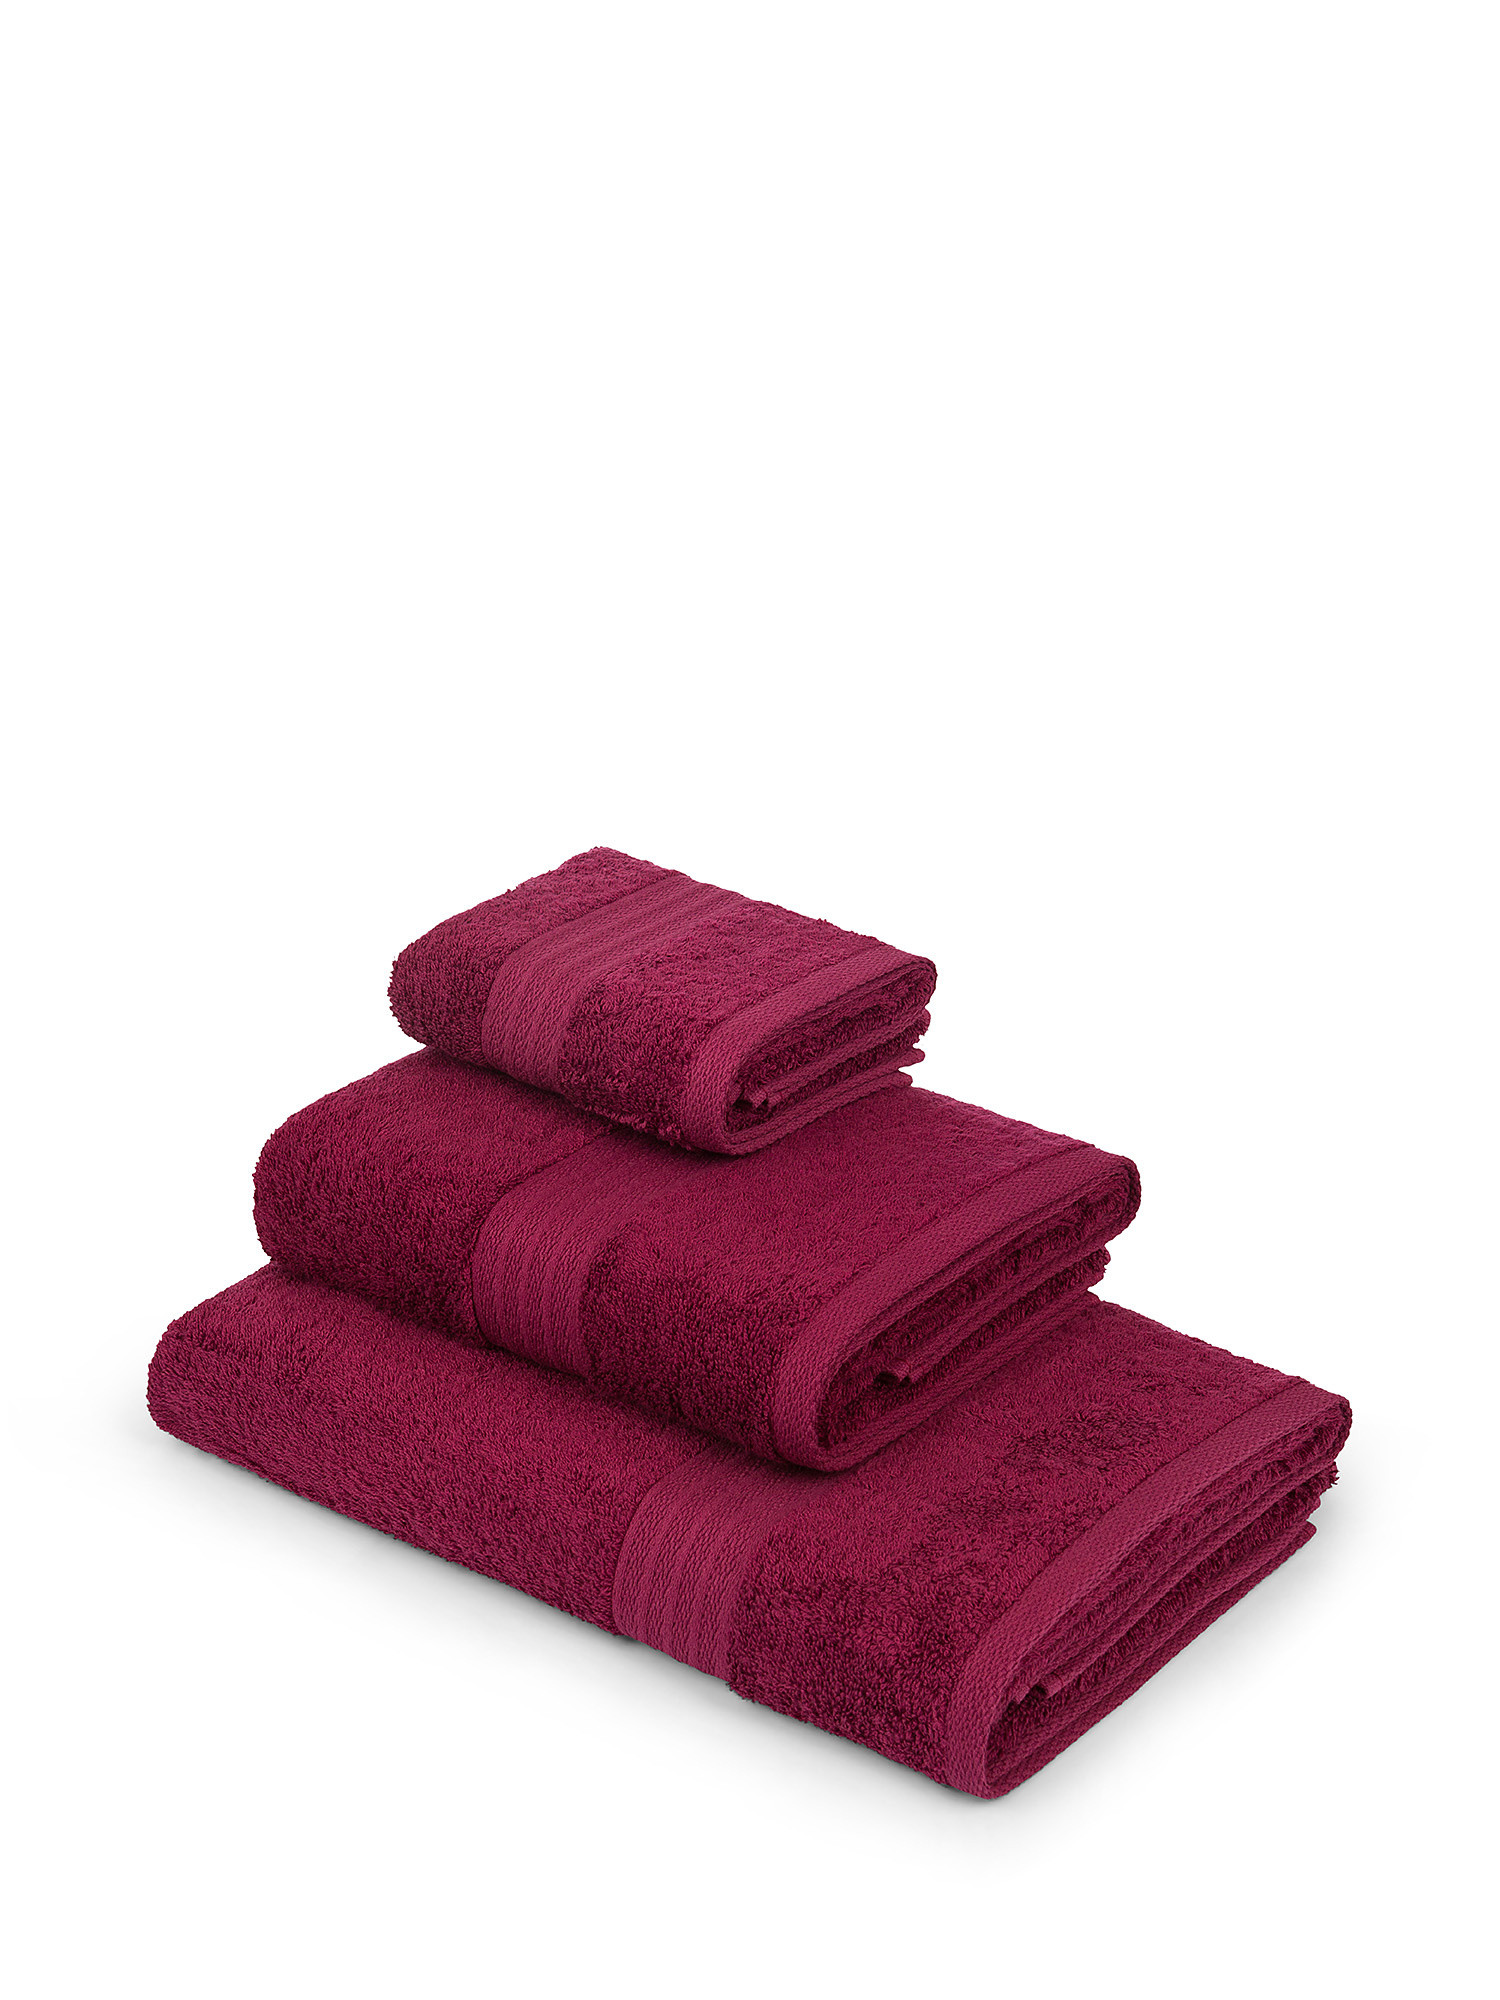 Zefiro solid color 100% cotton towel, Cherry Red, large image number 0